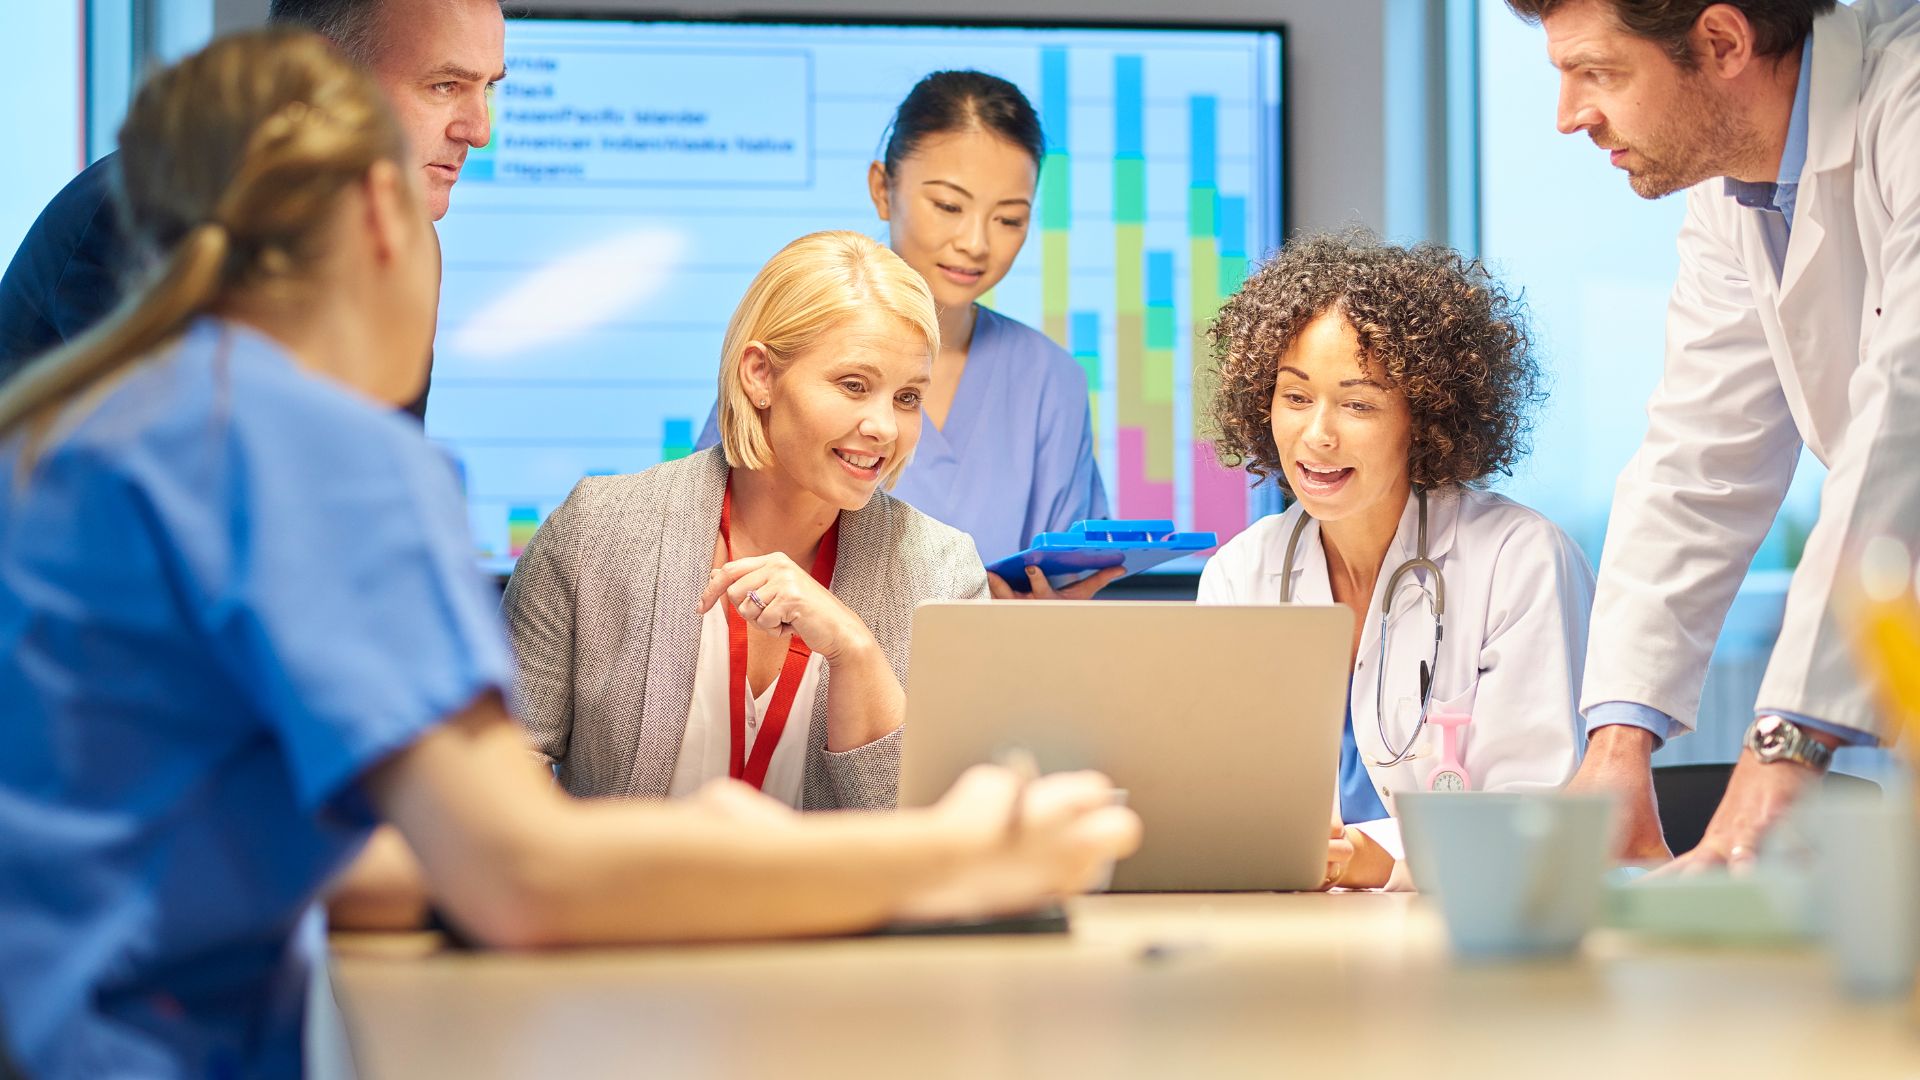 How Important is Communication and Collaboration in Healthcare?